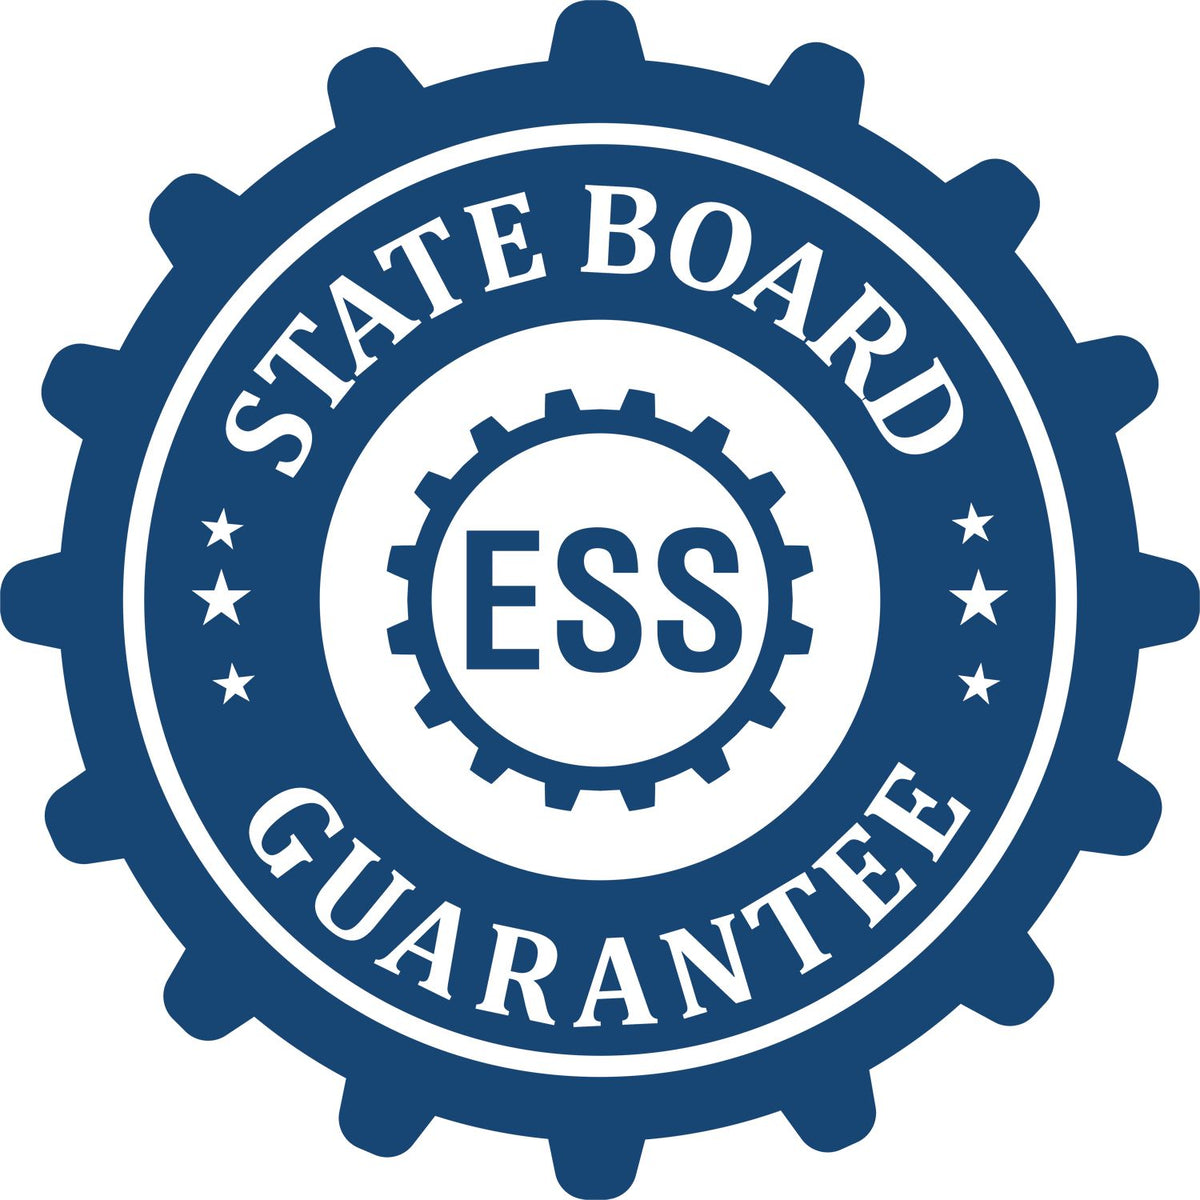 An emblem in a gear shape illustrating a state board guarantee for the Florida Professional Geologist Seal Stamp